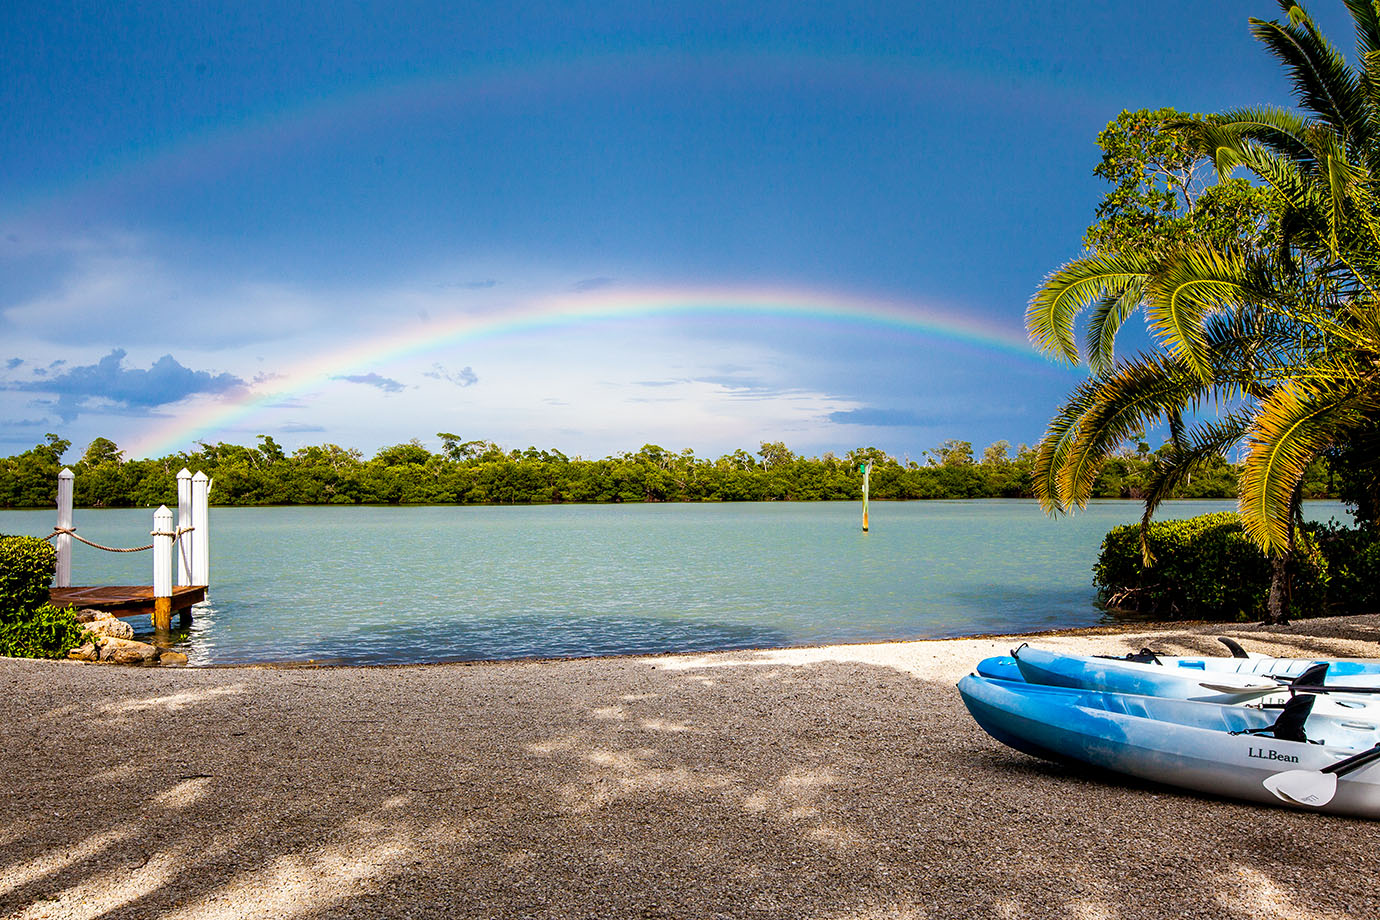 View of the private beach at the Sea Oats Estate with clear blue water and a rainbow over the ocean